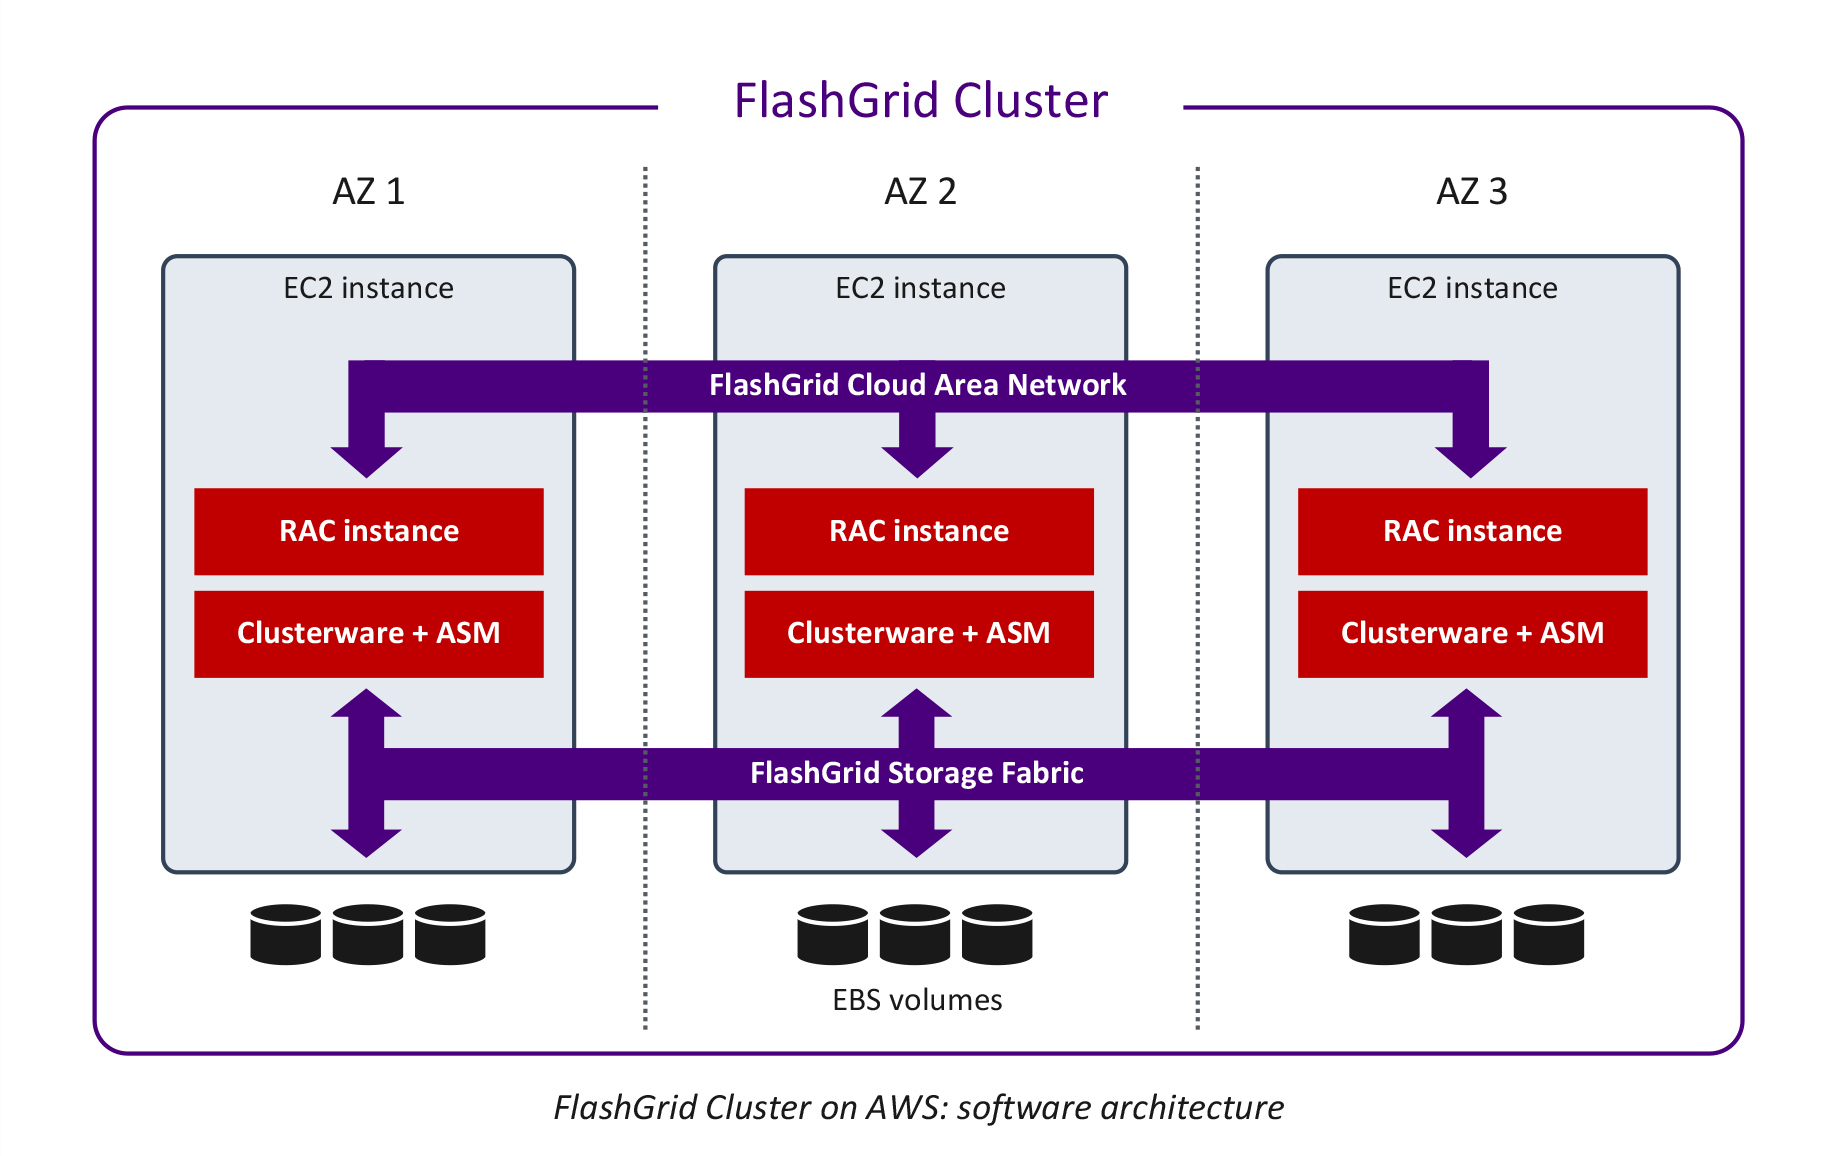 FlashGrid Cluster for Oracle RAC on AWS - Architecture